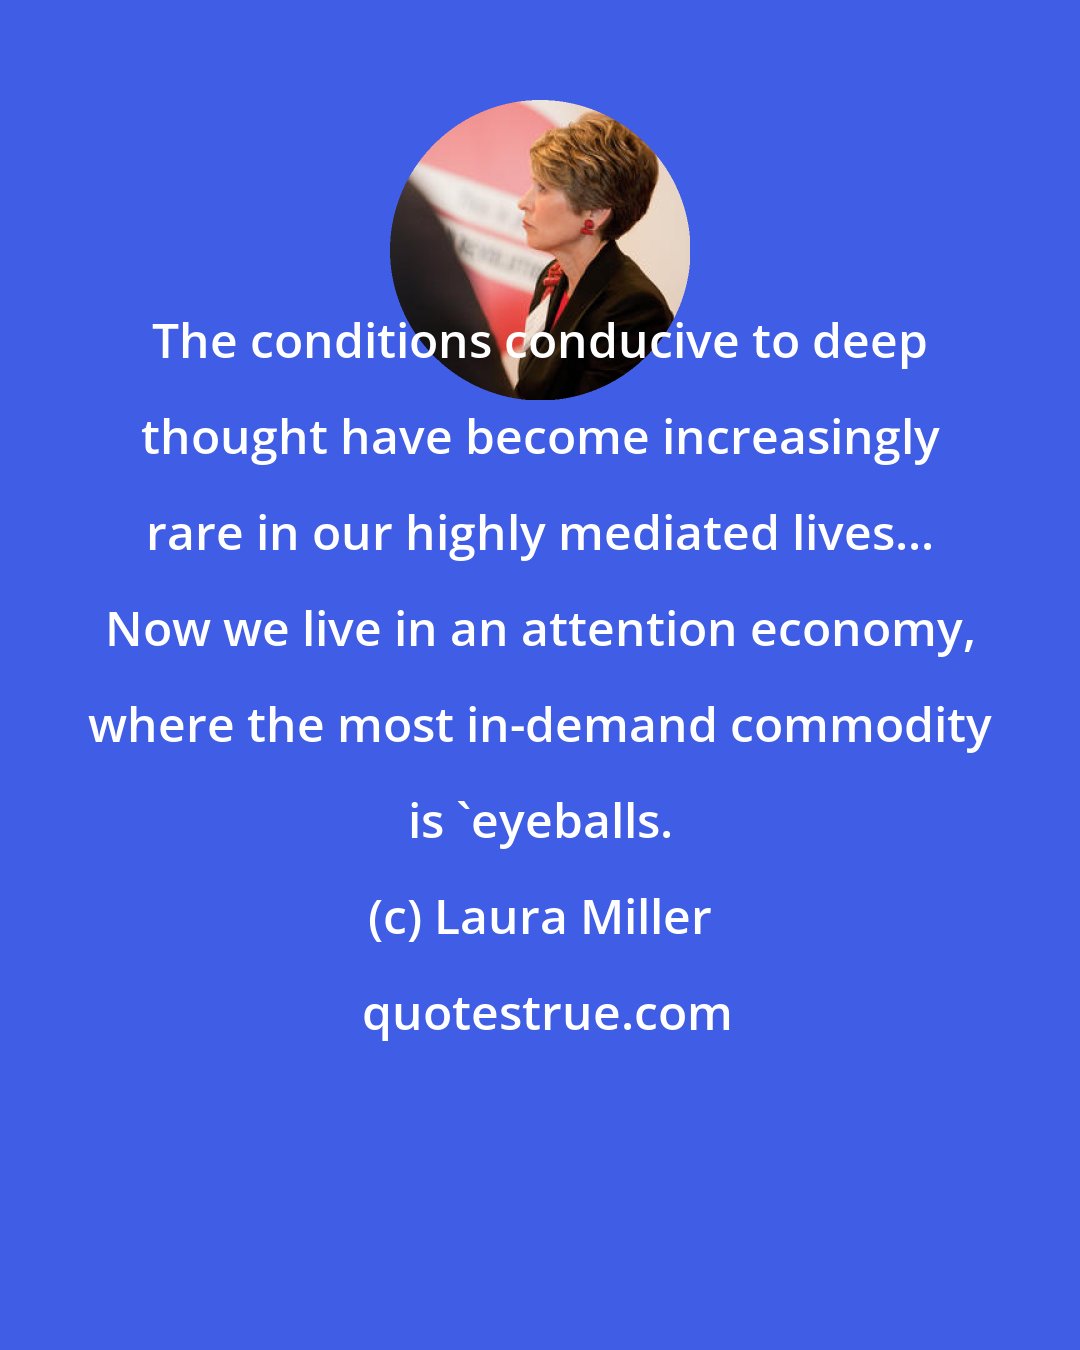 Laura Miller: The conditions conducive to deep thought have become increasingly rare in our highly mediated lives... Now we live in an attention economy, where the most in-demand commodity is 'eyeballs.